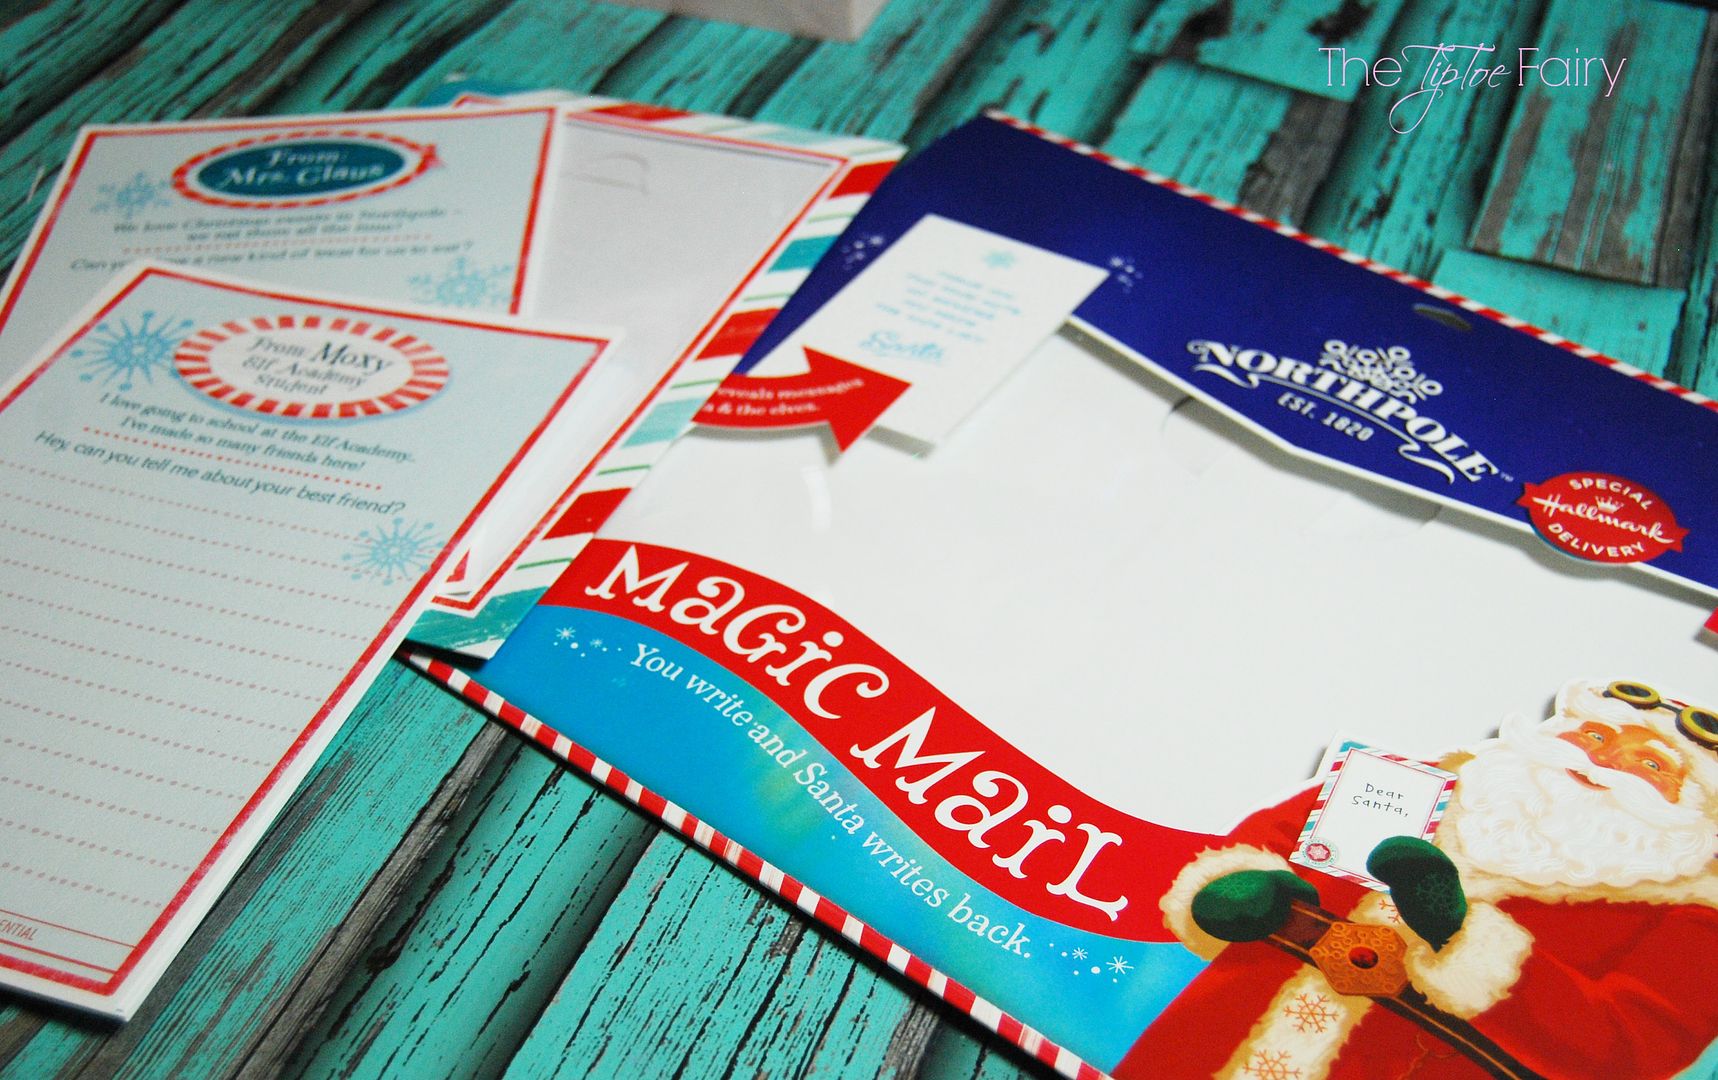 Love Hallmark sent us some wonderful gifts from the Northpole 1820 line - Northpole Communicator Interactive Microphone, Find me Santa! Snowflake ornament, and Santa's Magic Mail Stationary | The TipToe Fairy #Northpole #Hallmark